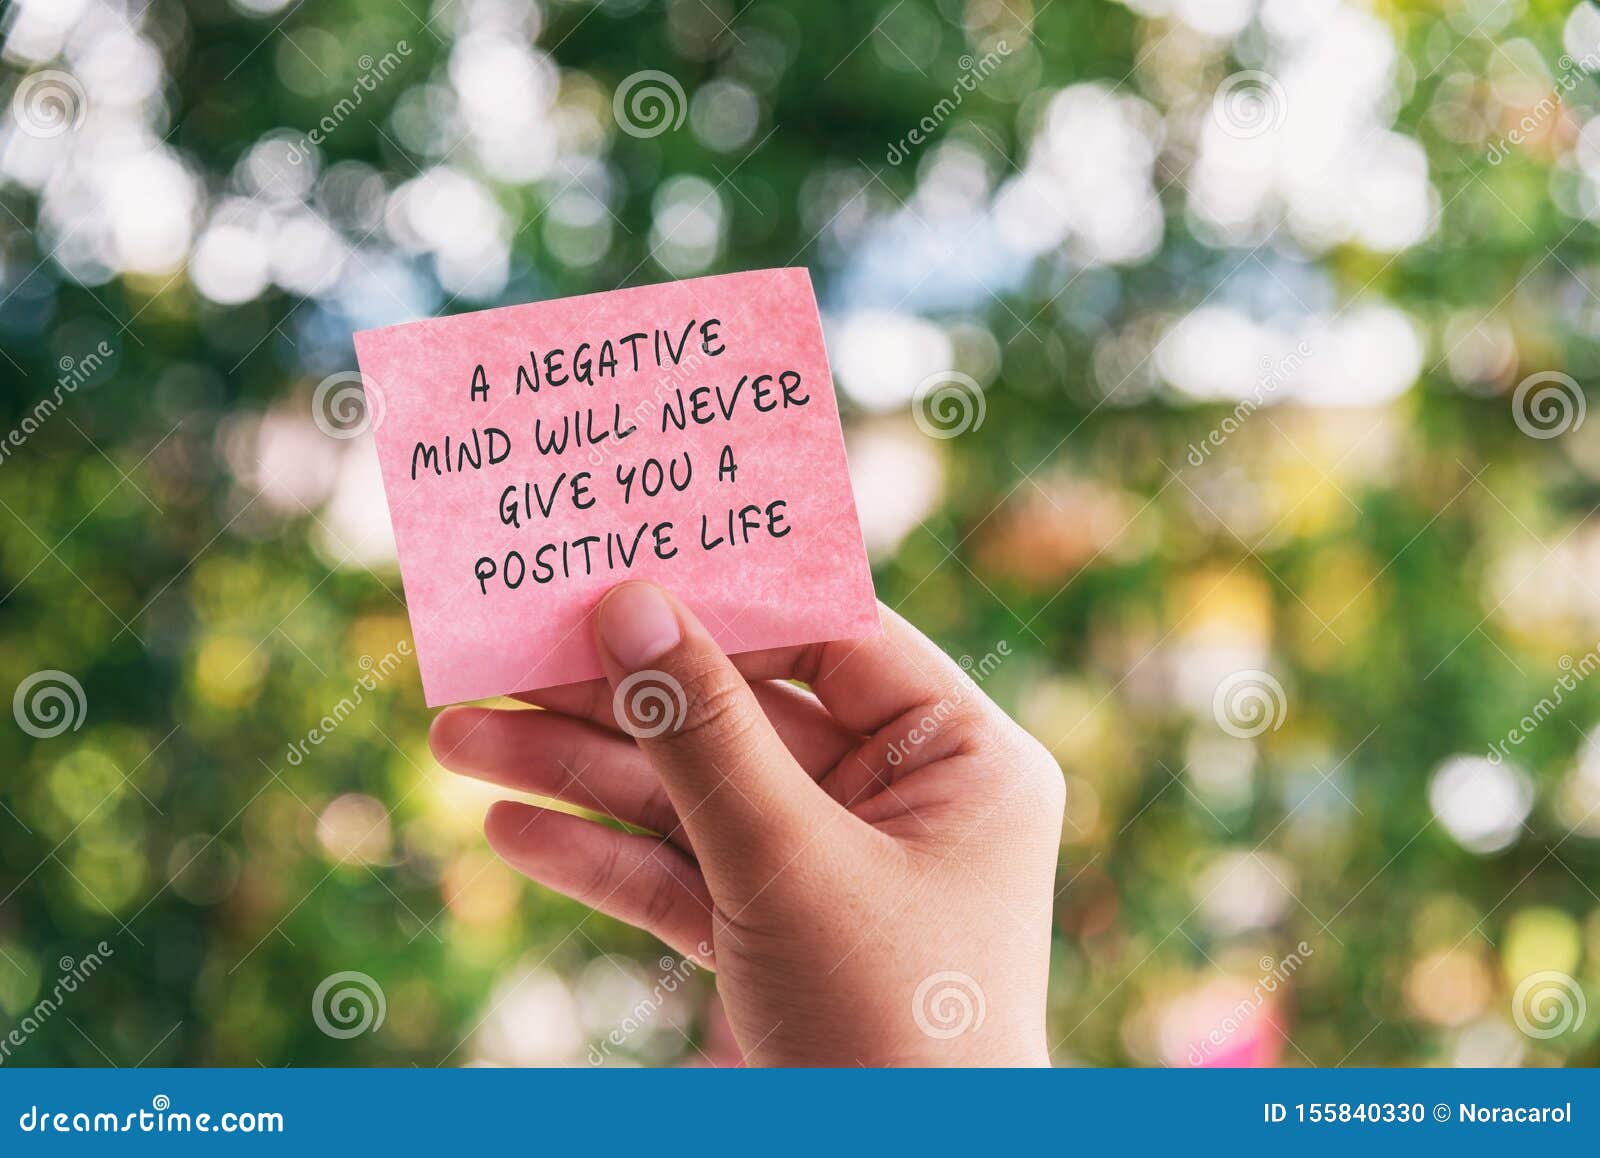 Life Motivational and Inspirational Quotes - a Negative Mind Will ...